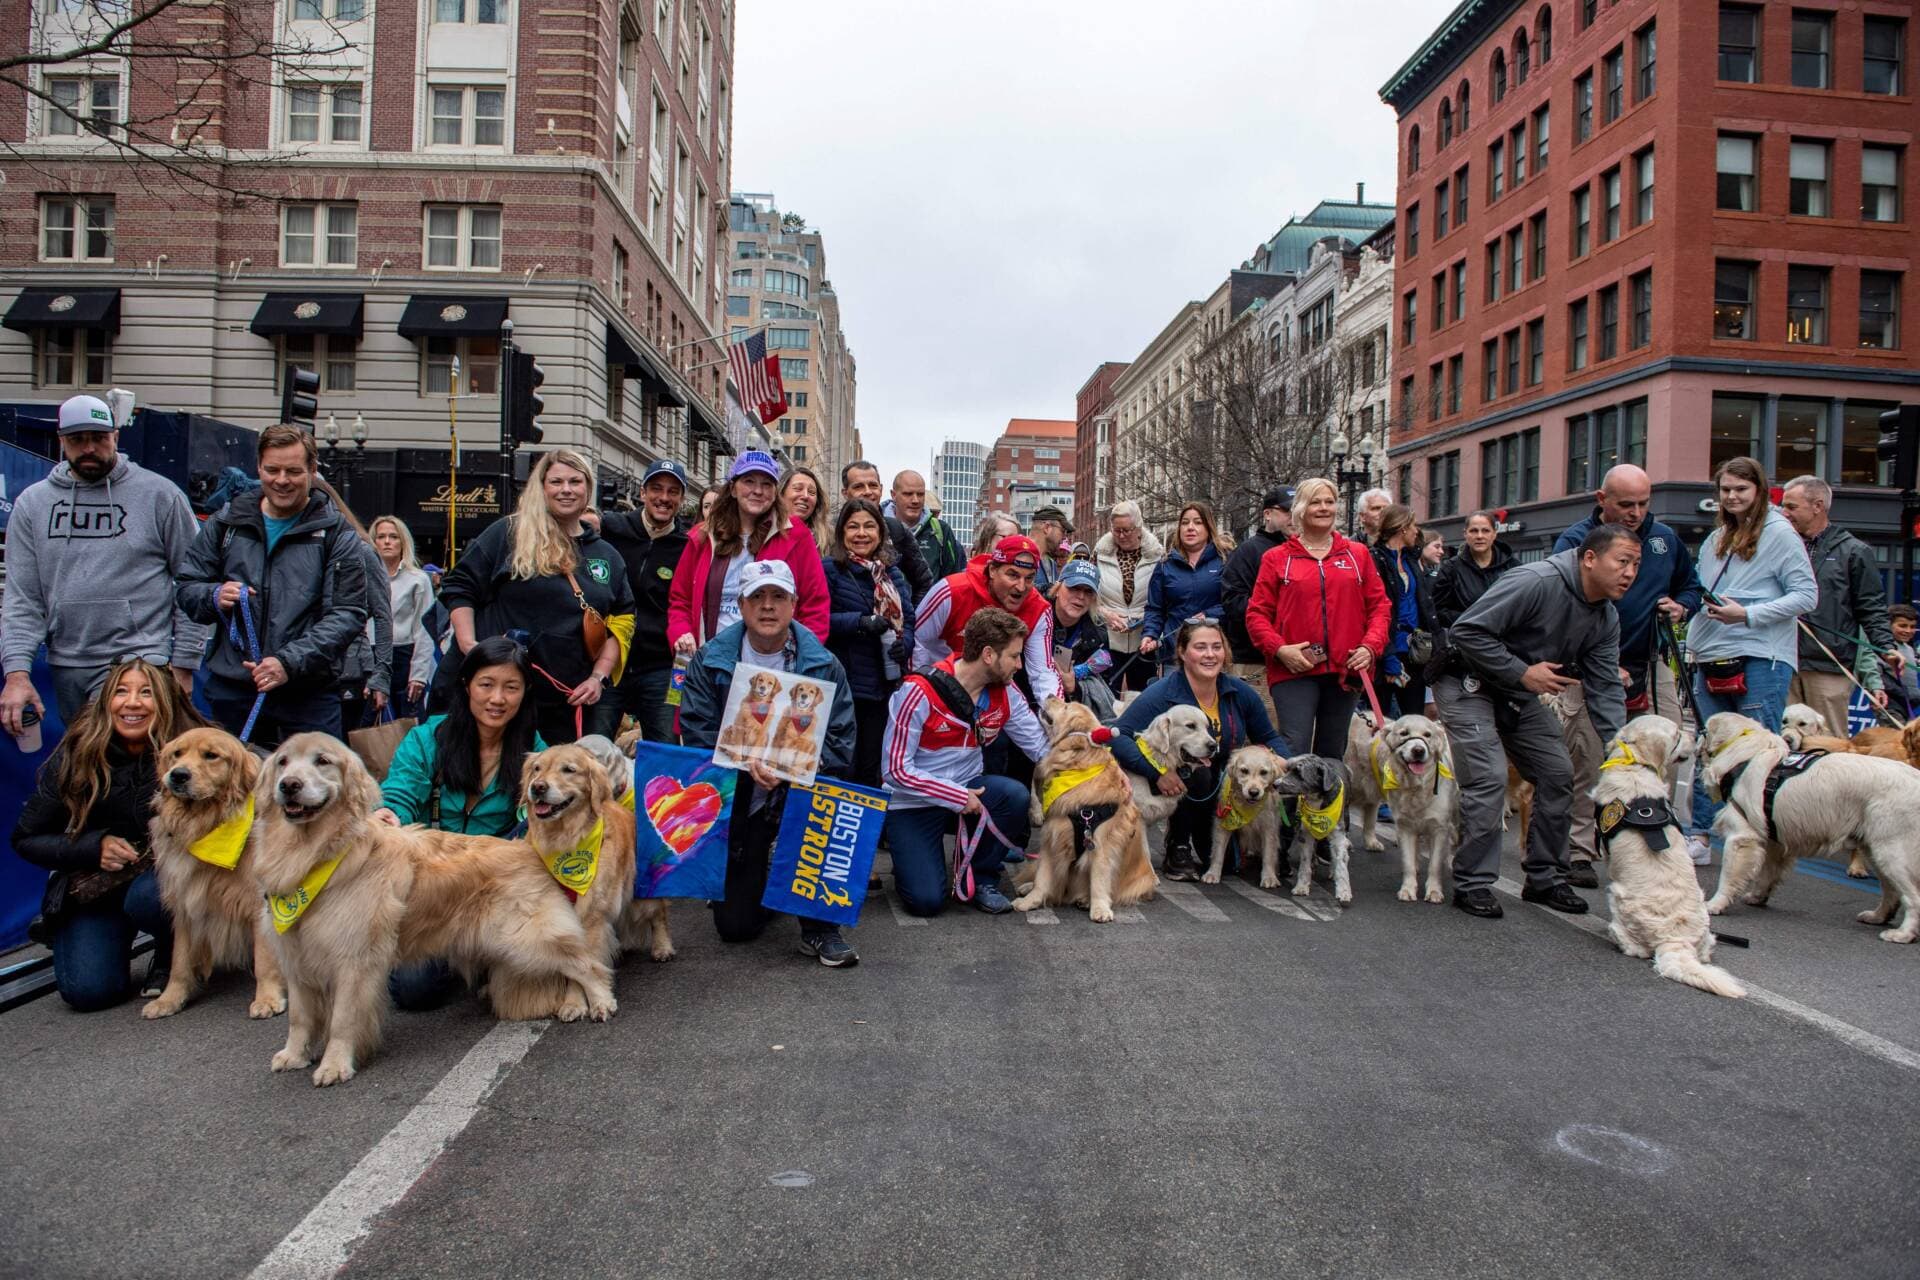 Dorrey and Rich Powers (center, left) hold a photo of Spencer and his sister, Penny, as well as the &quot;Boston Strong&quot; flag Spencer would carry at the marathon, with dozens of other golden retrievers and their owners. (Joseph Prezioso/AFP via Getty Images)